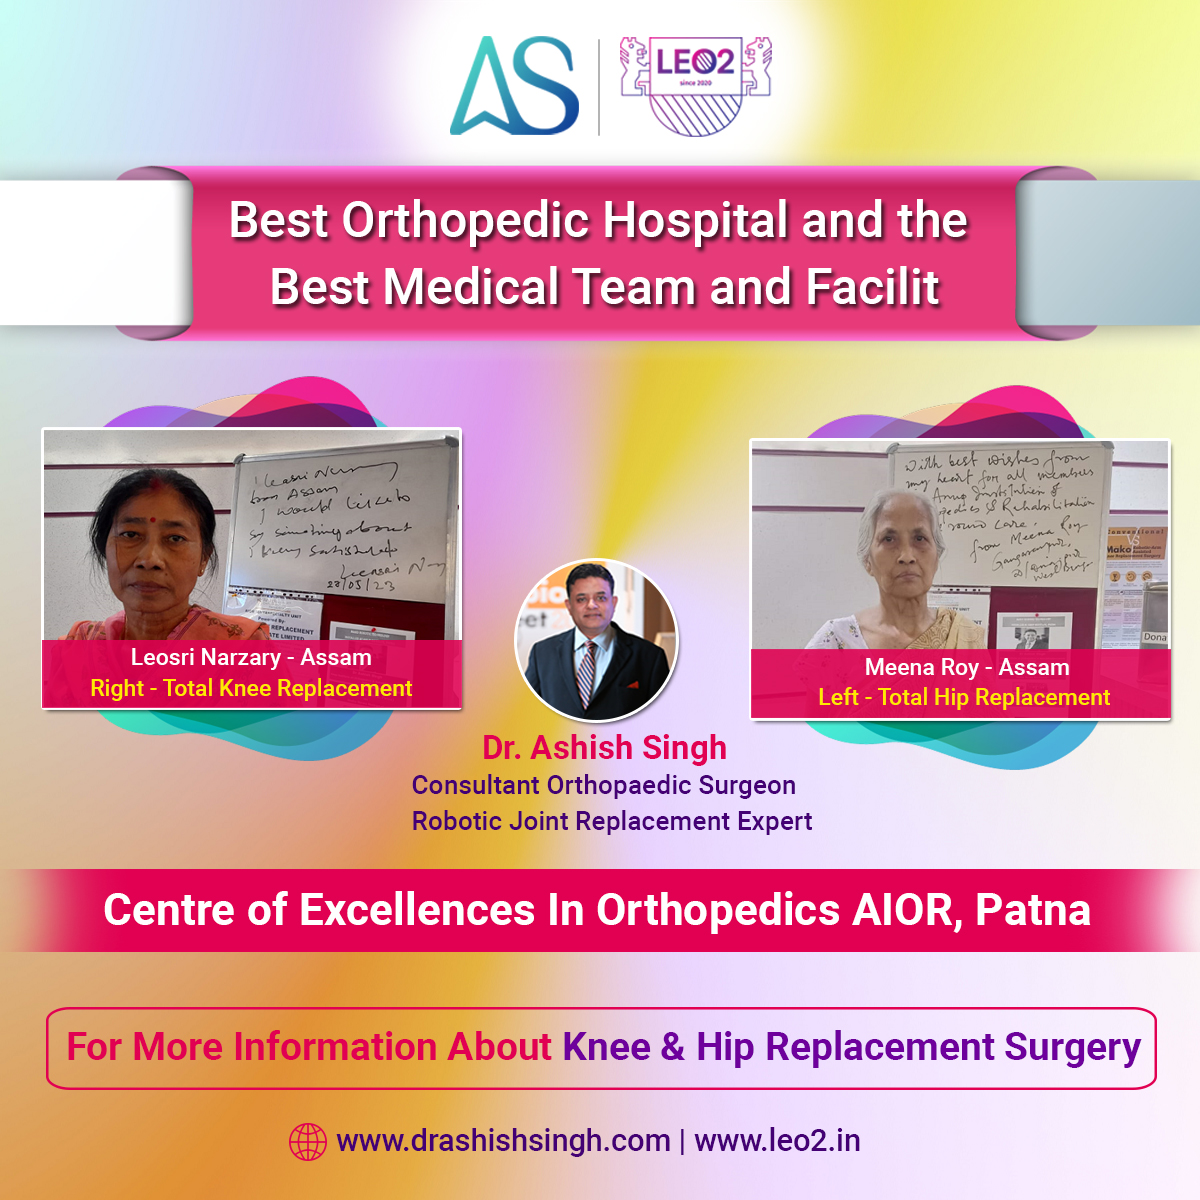 Best Orthopedic Hospital and the Best Medical Team and Facility

#kneereplacement #bonedoctor #anupinstitute #orthopaedichospital #kneereplacement #biharhospital #kneereplacementsurgerypatna #bestkneedoctor #patna #bihar #kneepain #drrnsingh #kneepaintreatmentpatna